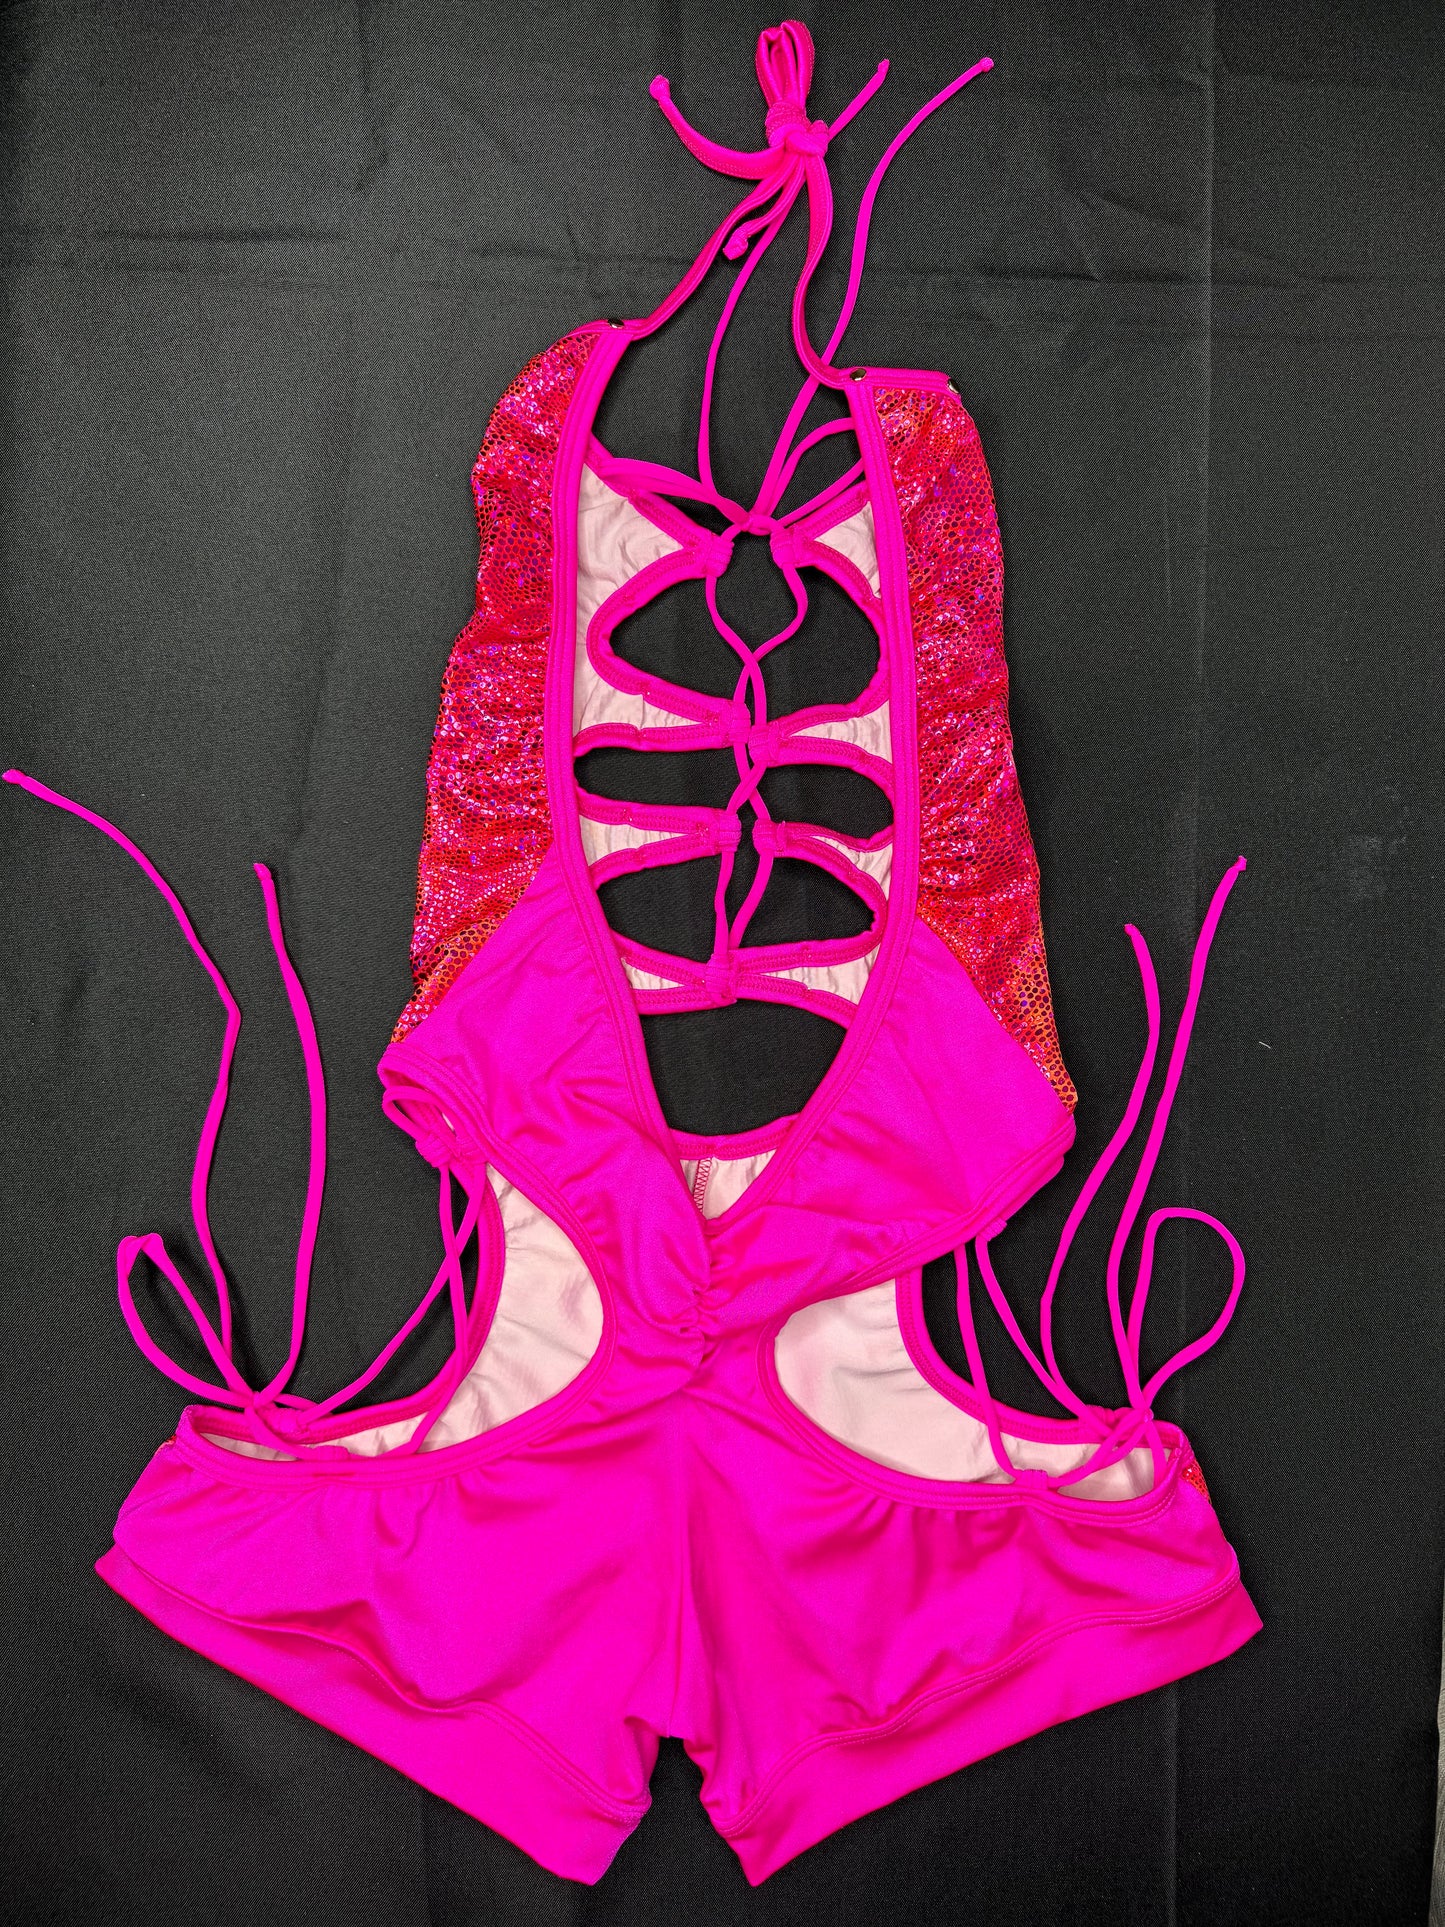 Hot Pink/Metallic Pink Scale One-Piece Romper Lingerie Outfit